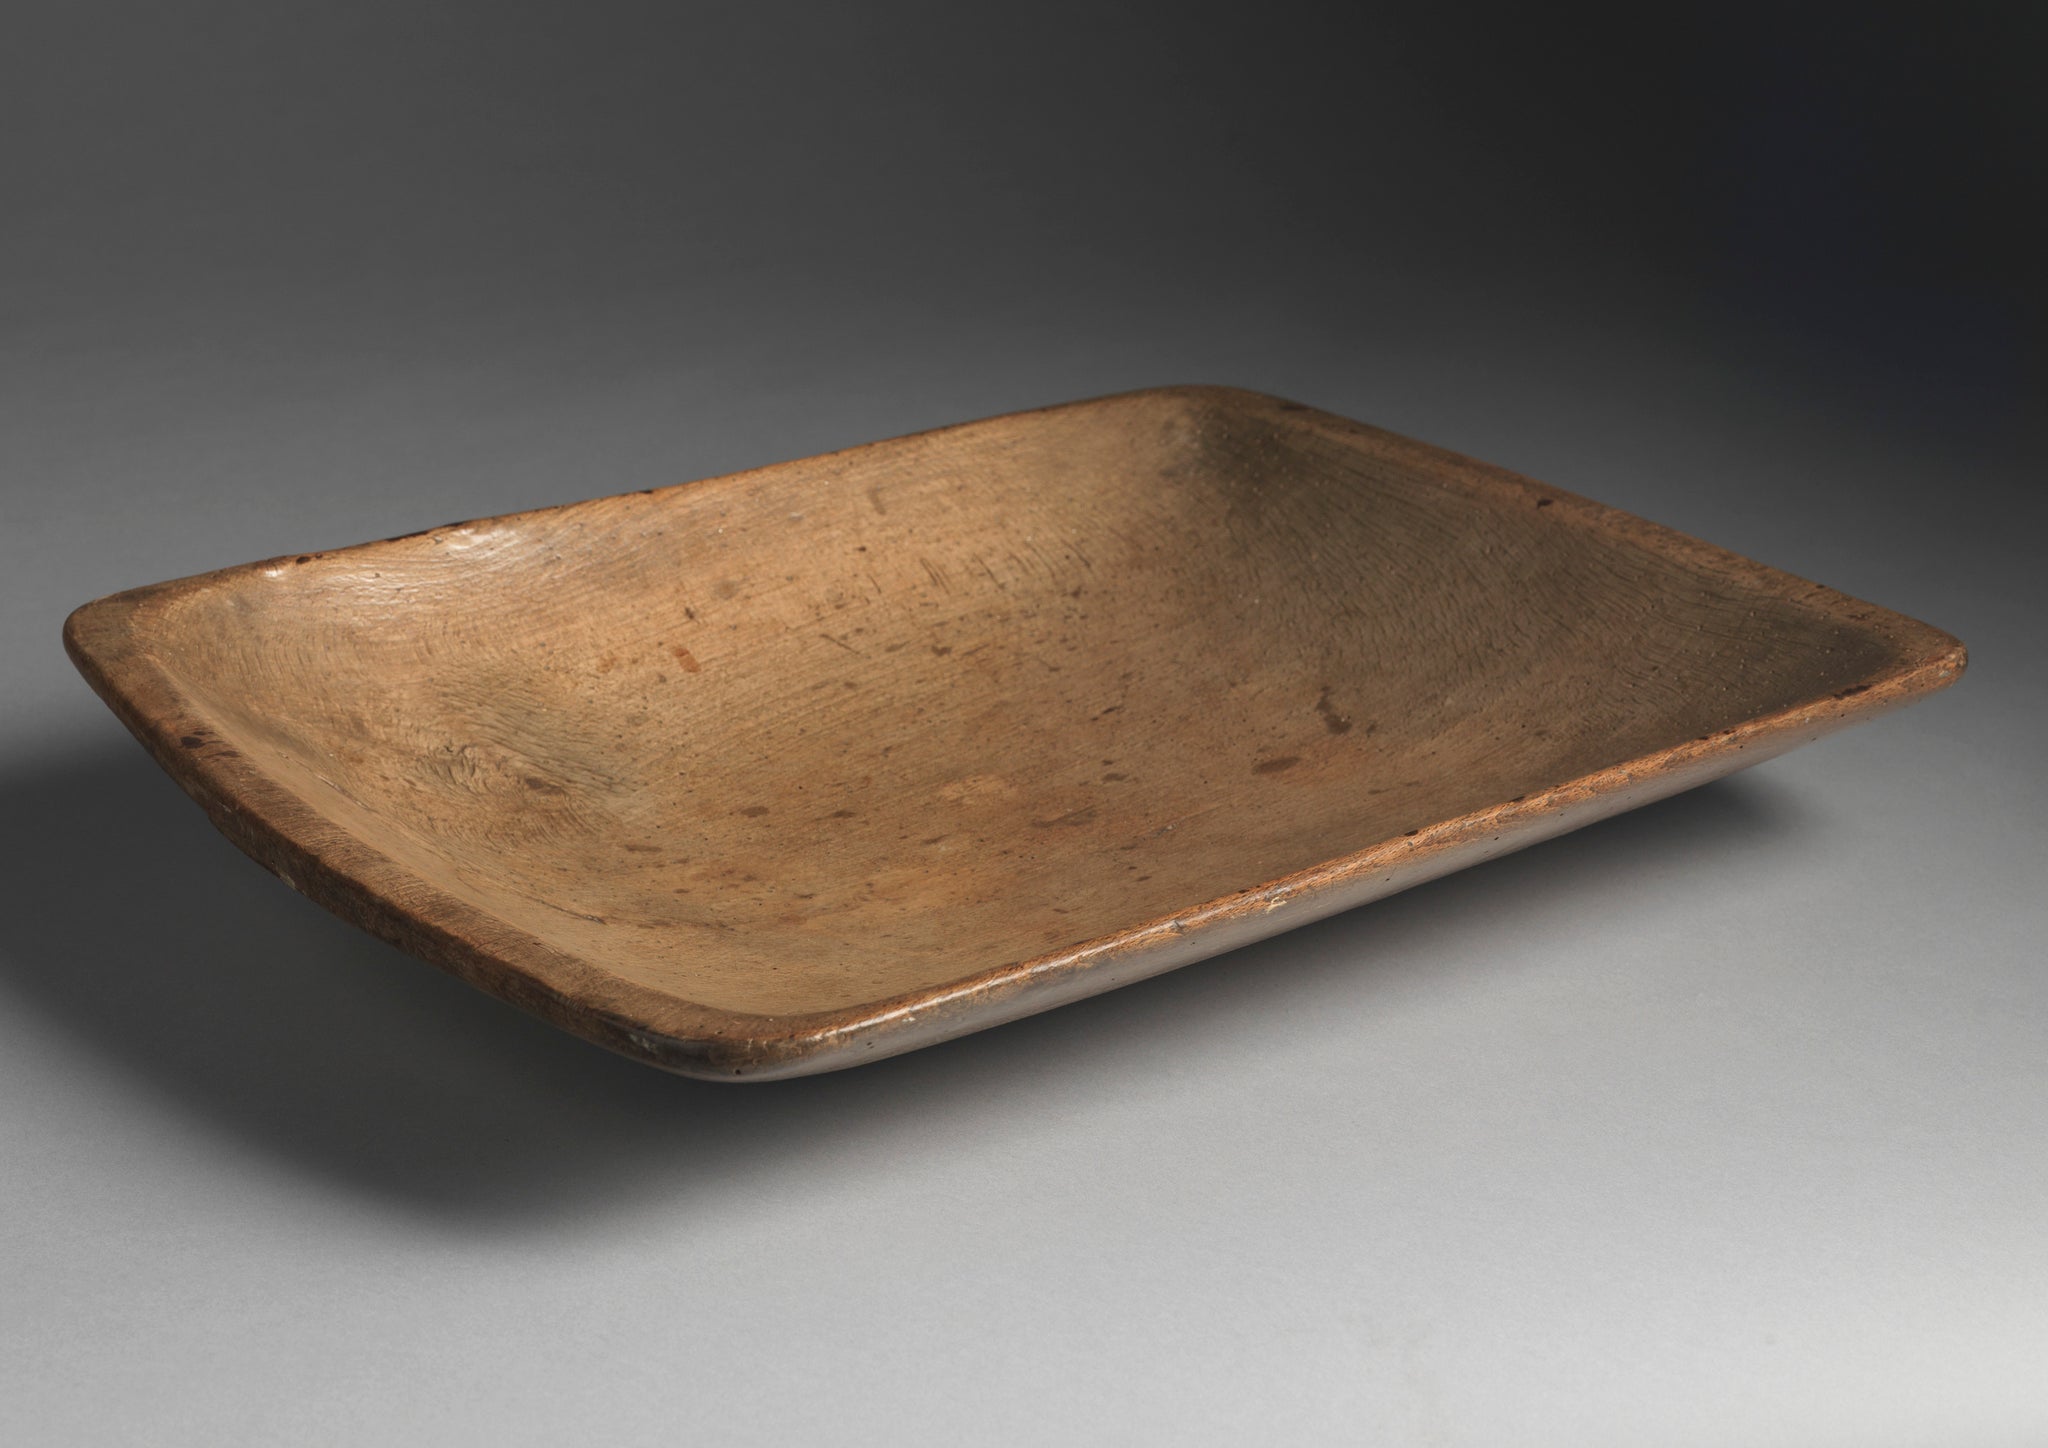 Early Rectangular Serving or 'Common' Dish